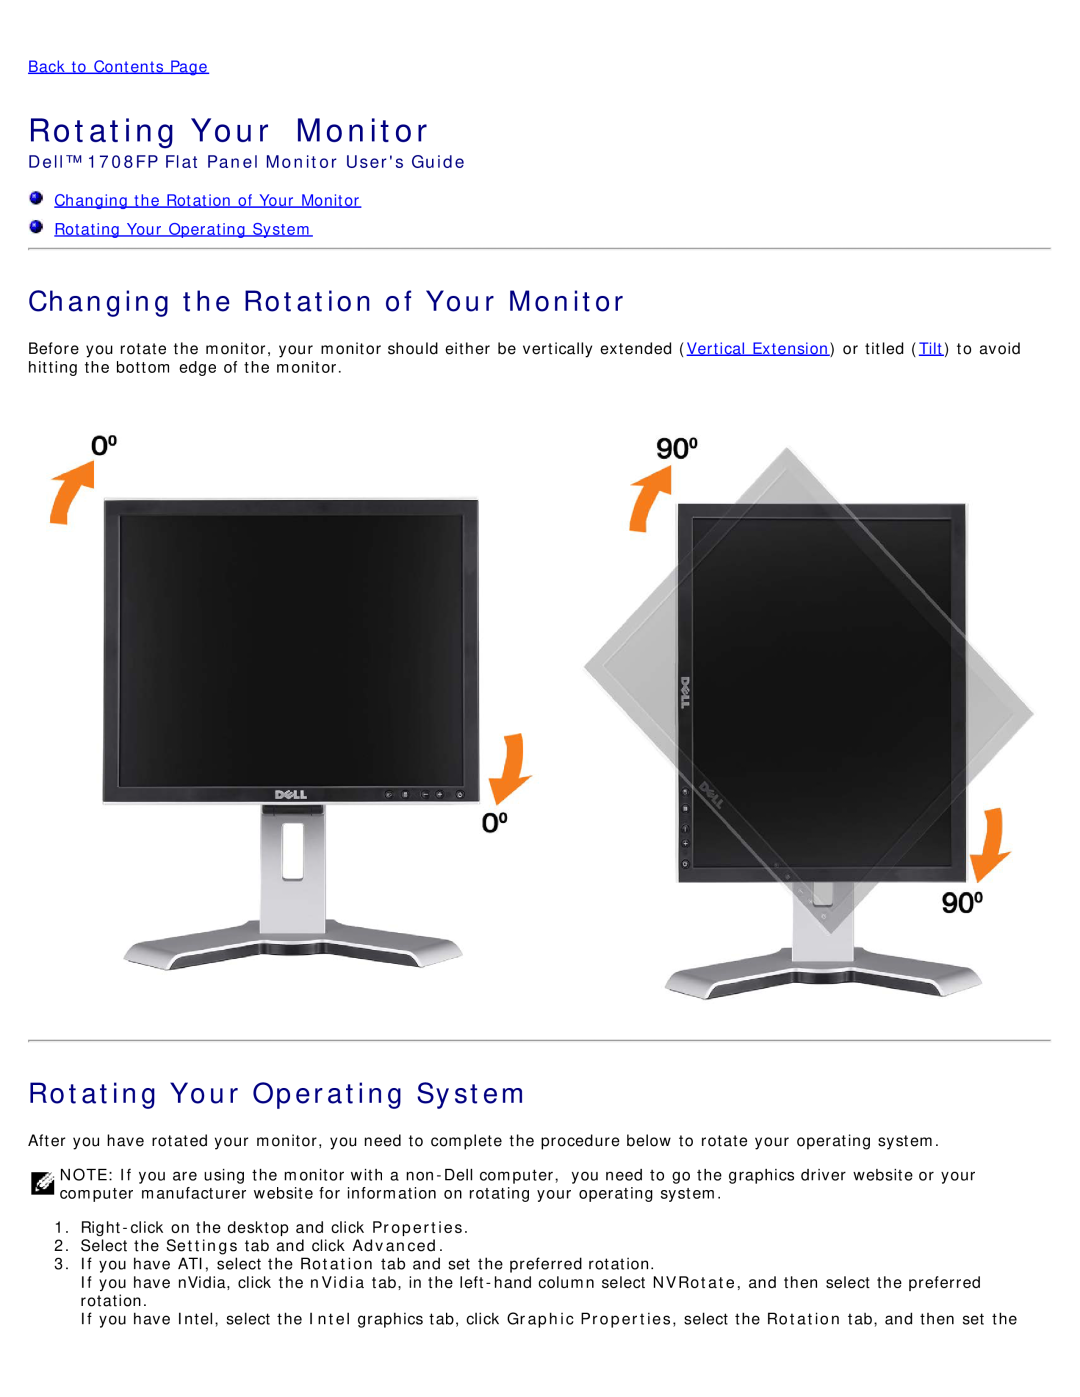 Dell 1708FP appendix Rotating Your Monitor, Changing the Rotation of Your Monitor, Rotating Your Operating System 